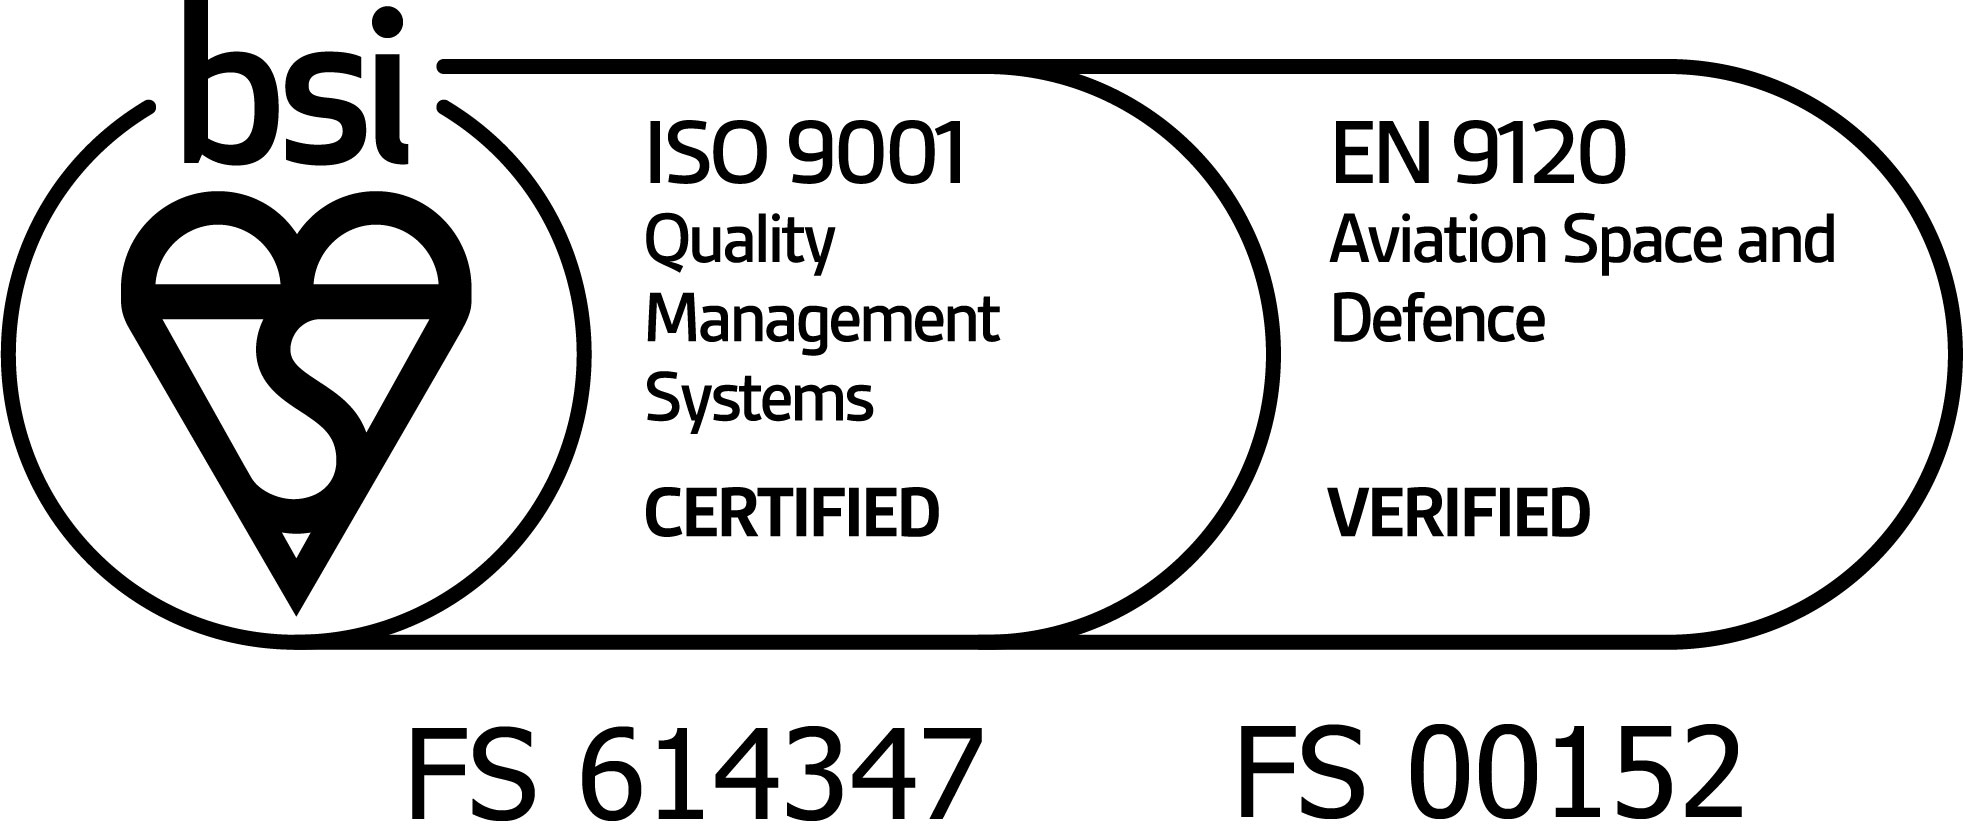 BSI ISO9001 Quality Management approved 